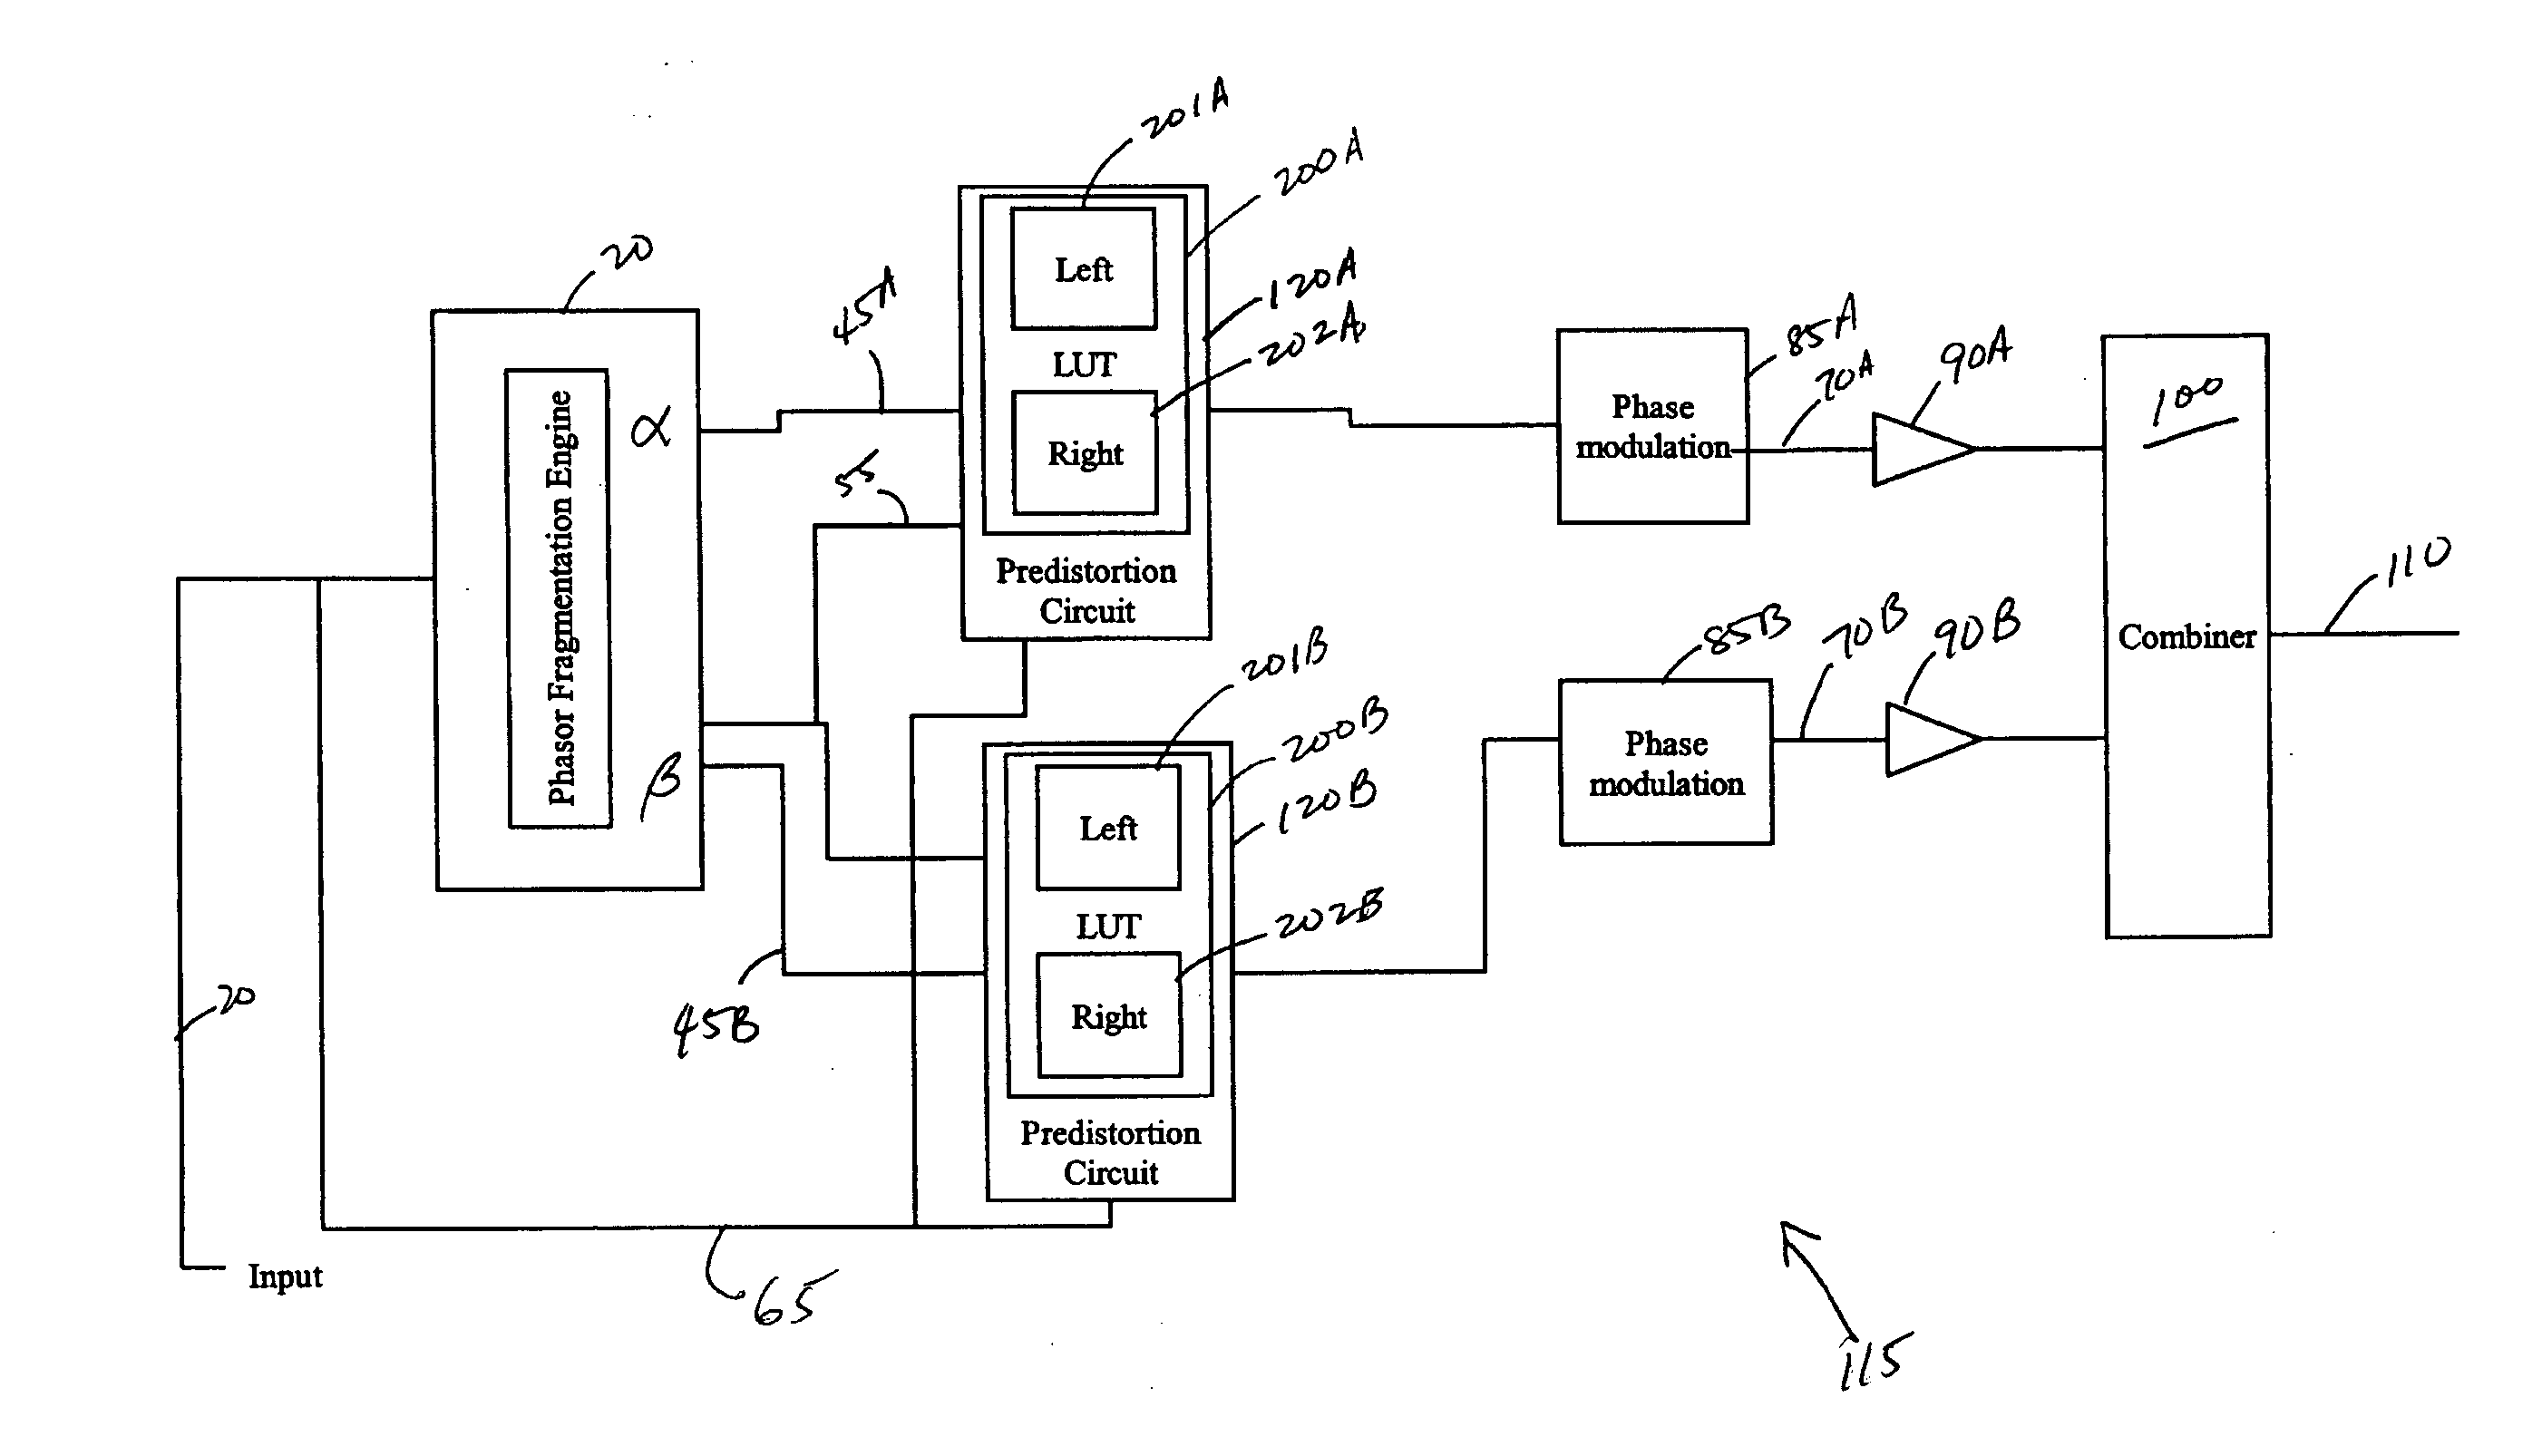 Predistortion circuit for a transmit system